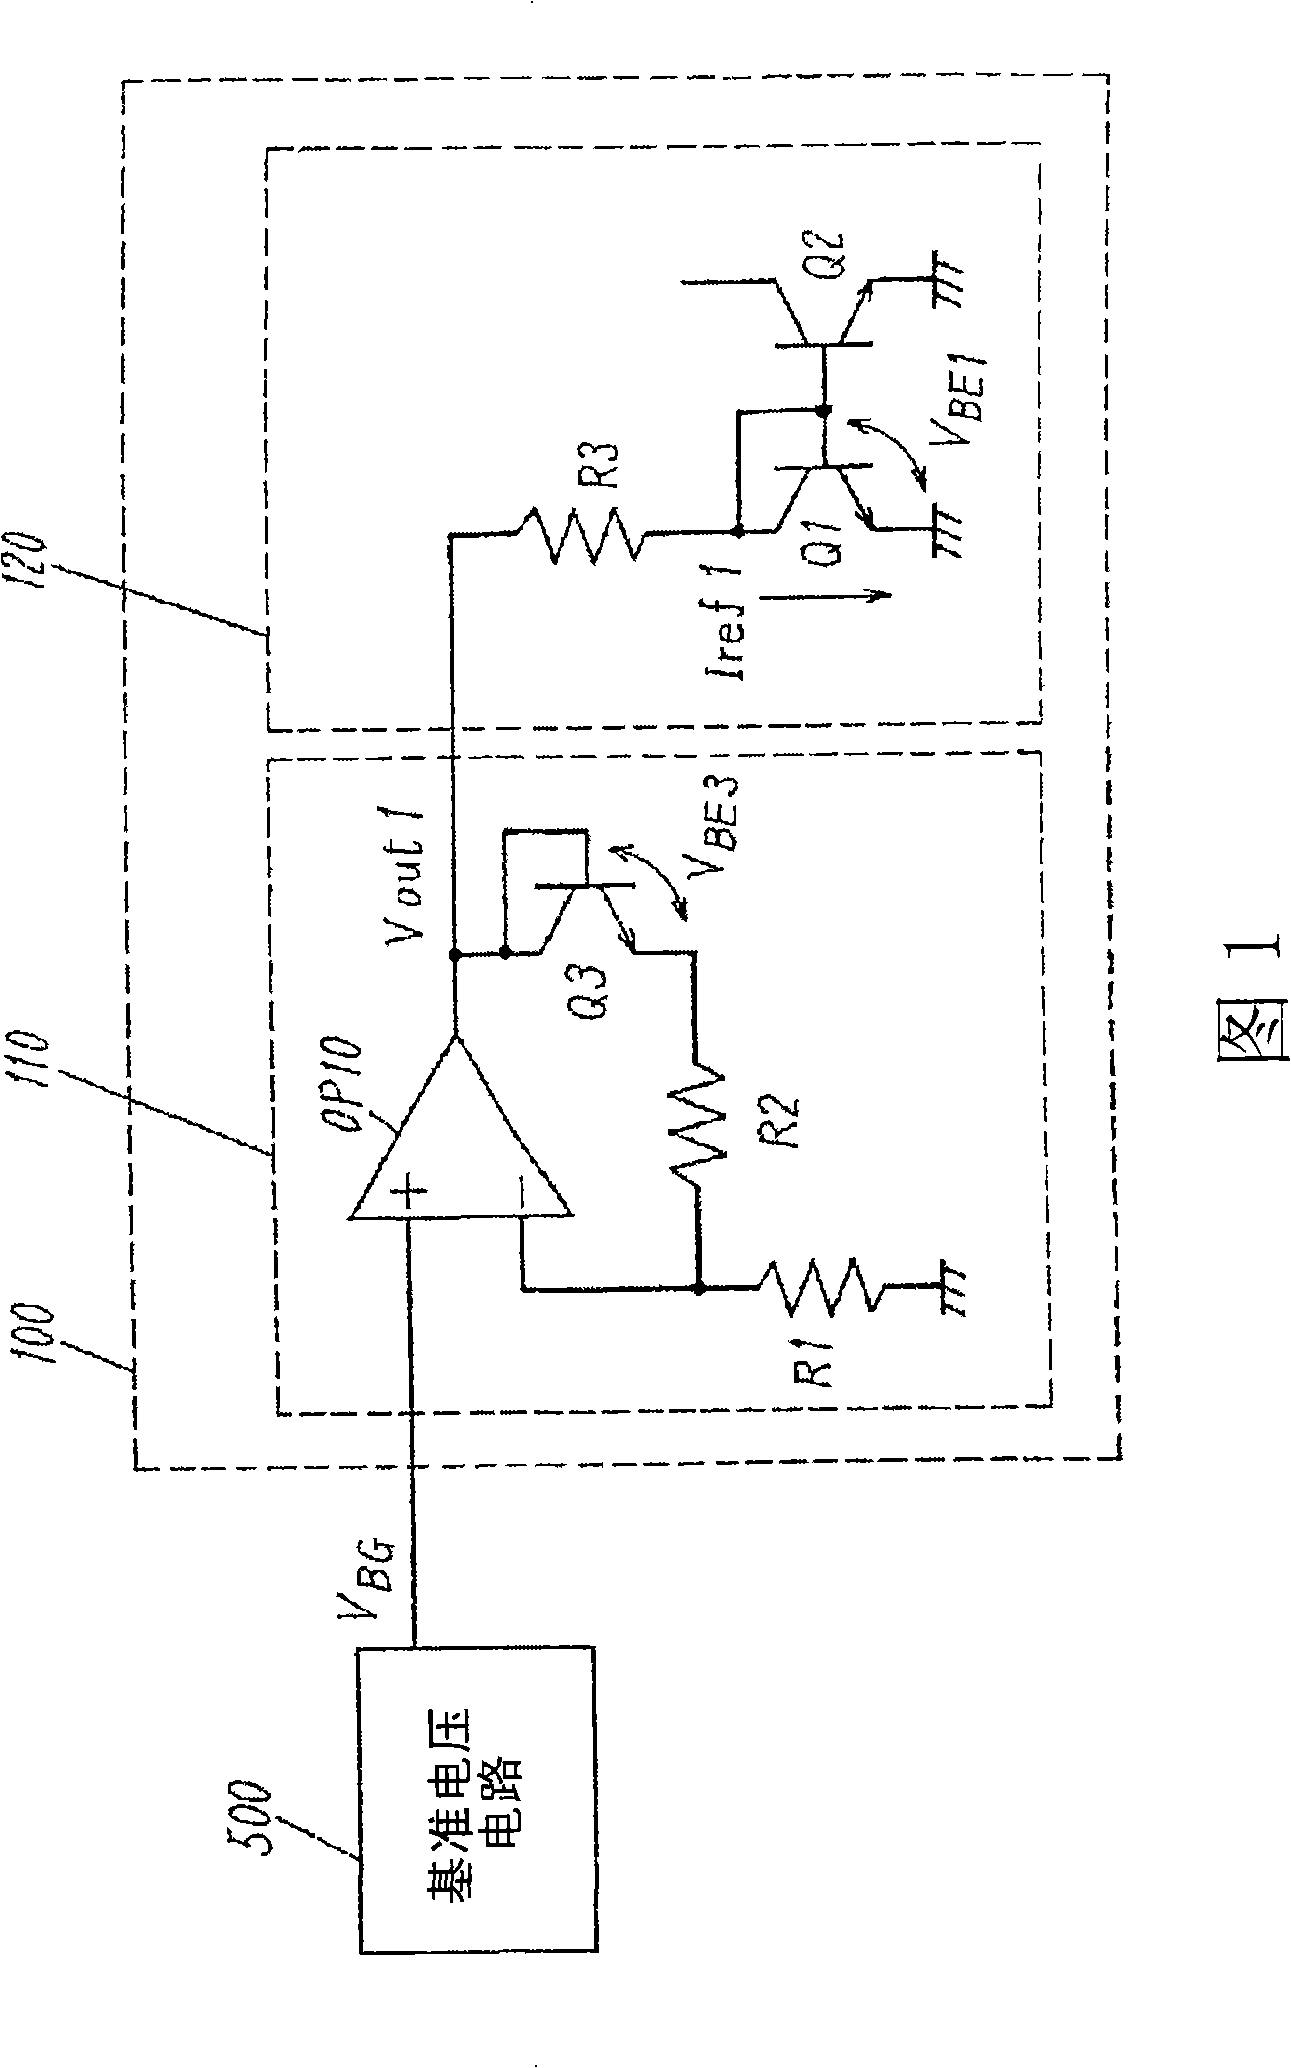 Reference current circuit